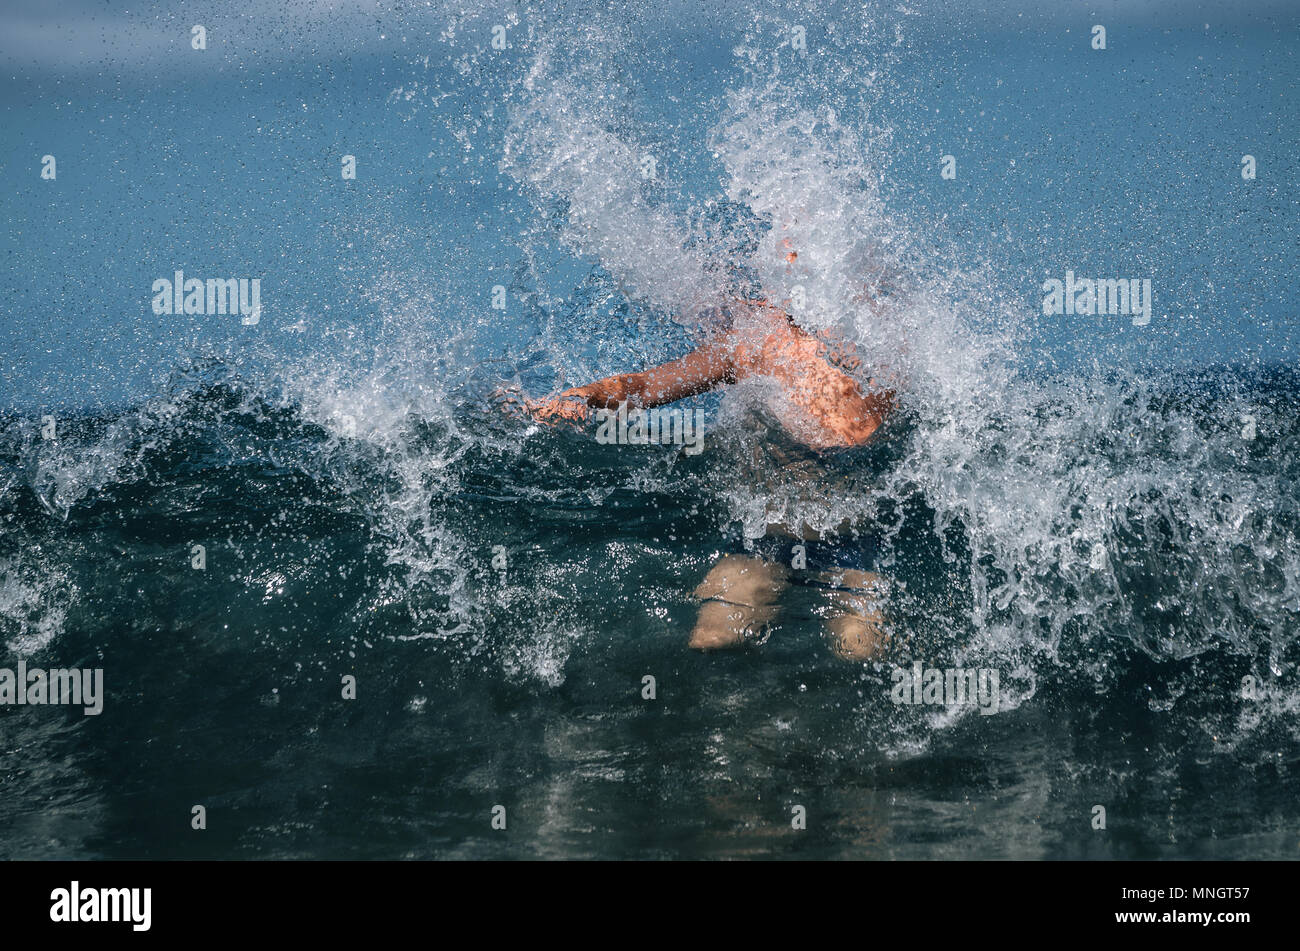 Man covered by waves of ocean with splashes Stock Photo